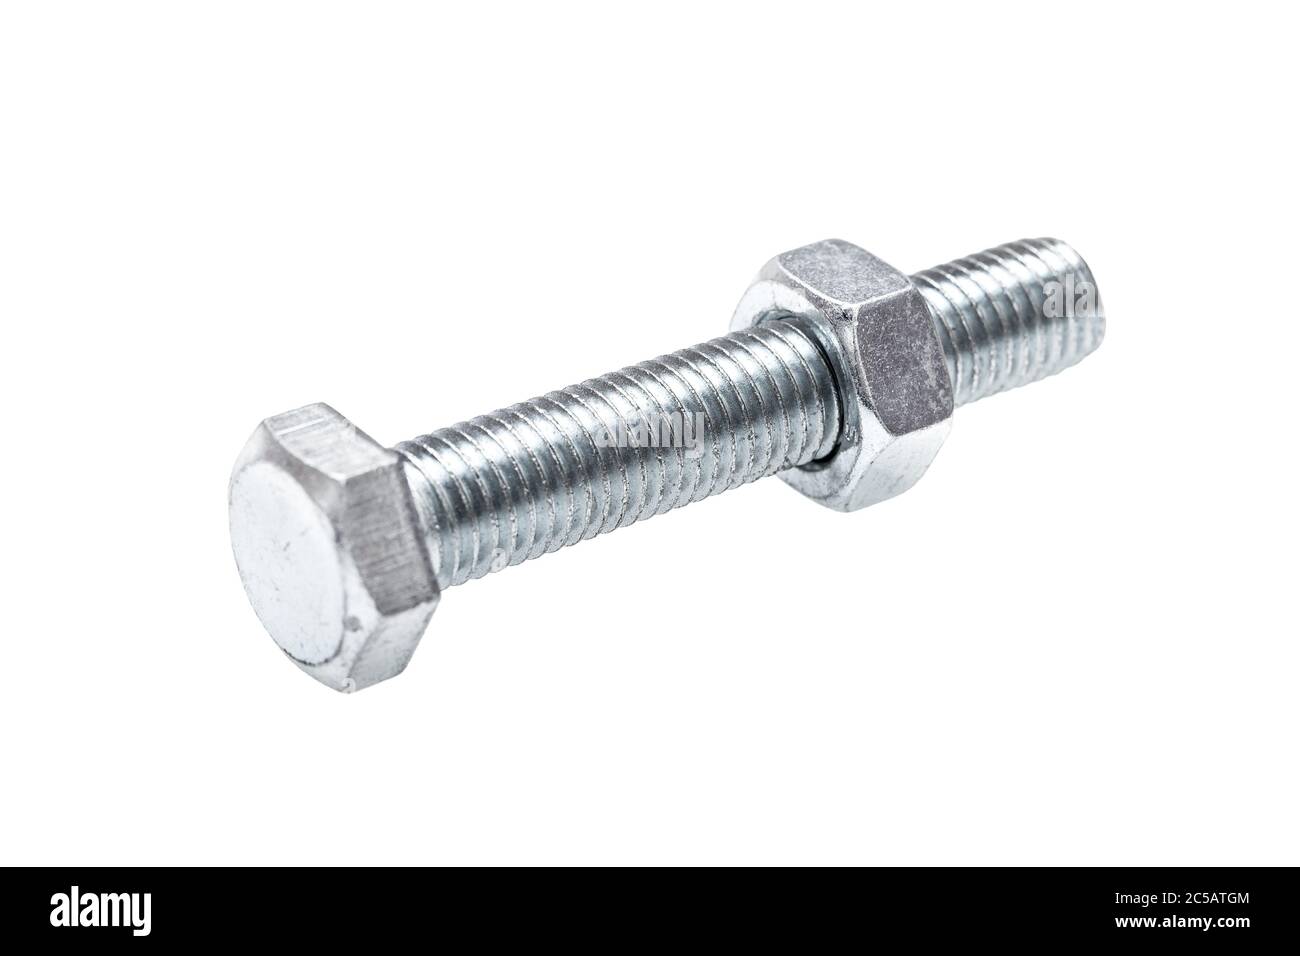 bolt with a threaded nut 3/4 view isolated on a white background. Stock Photo